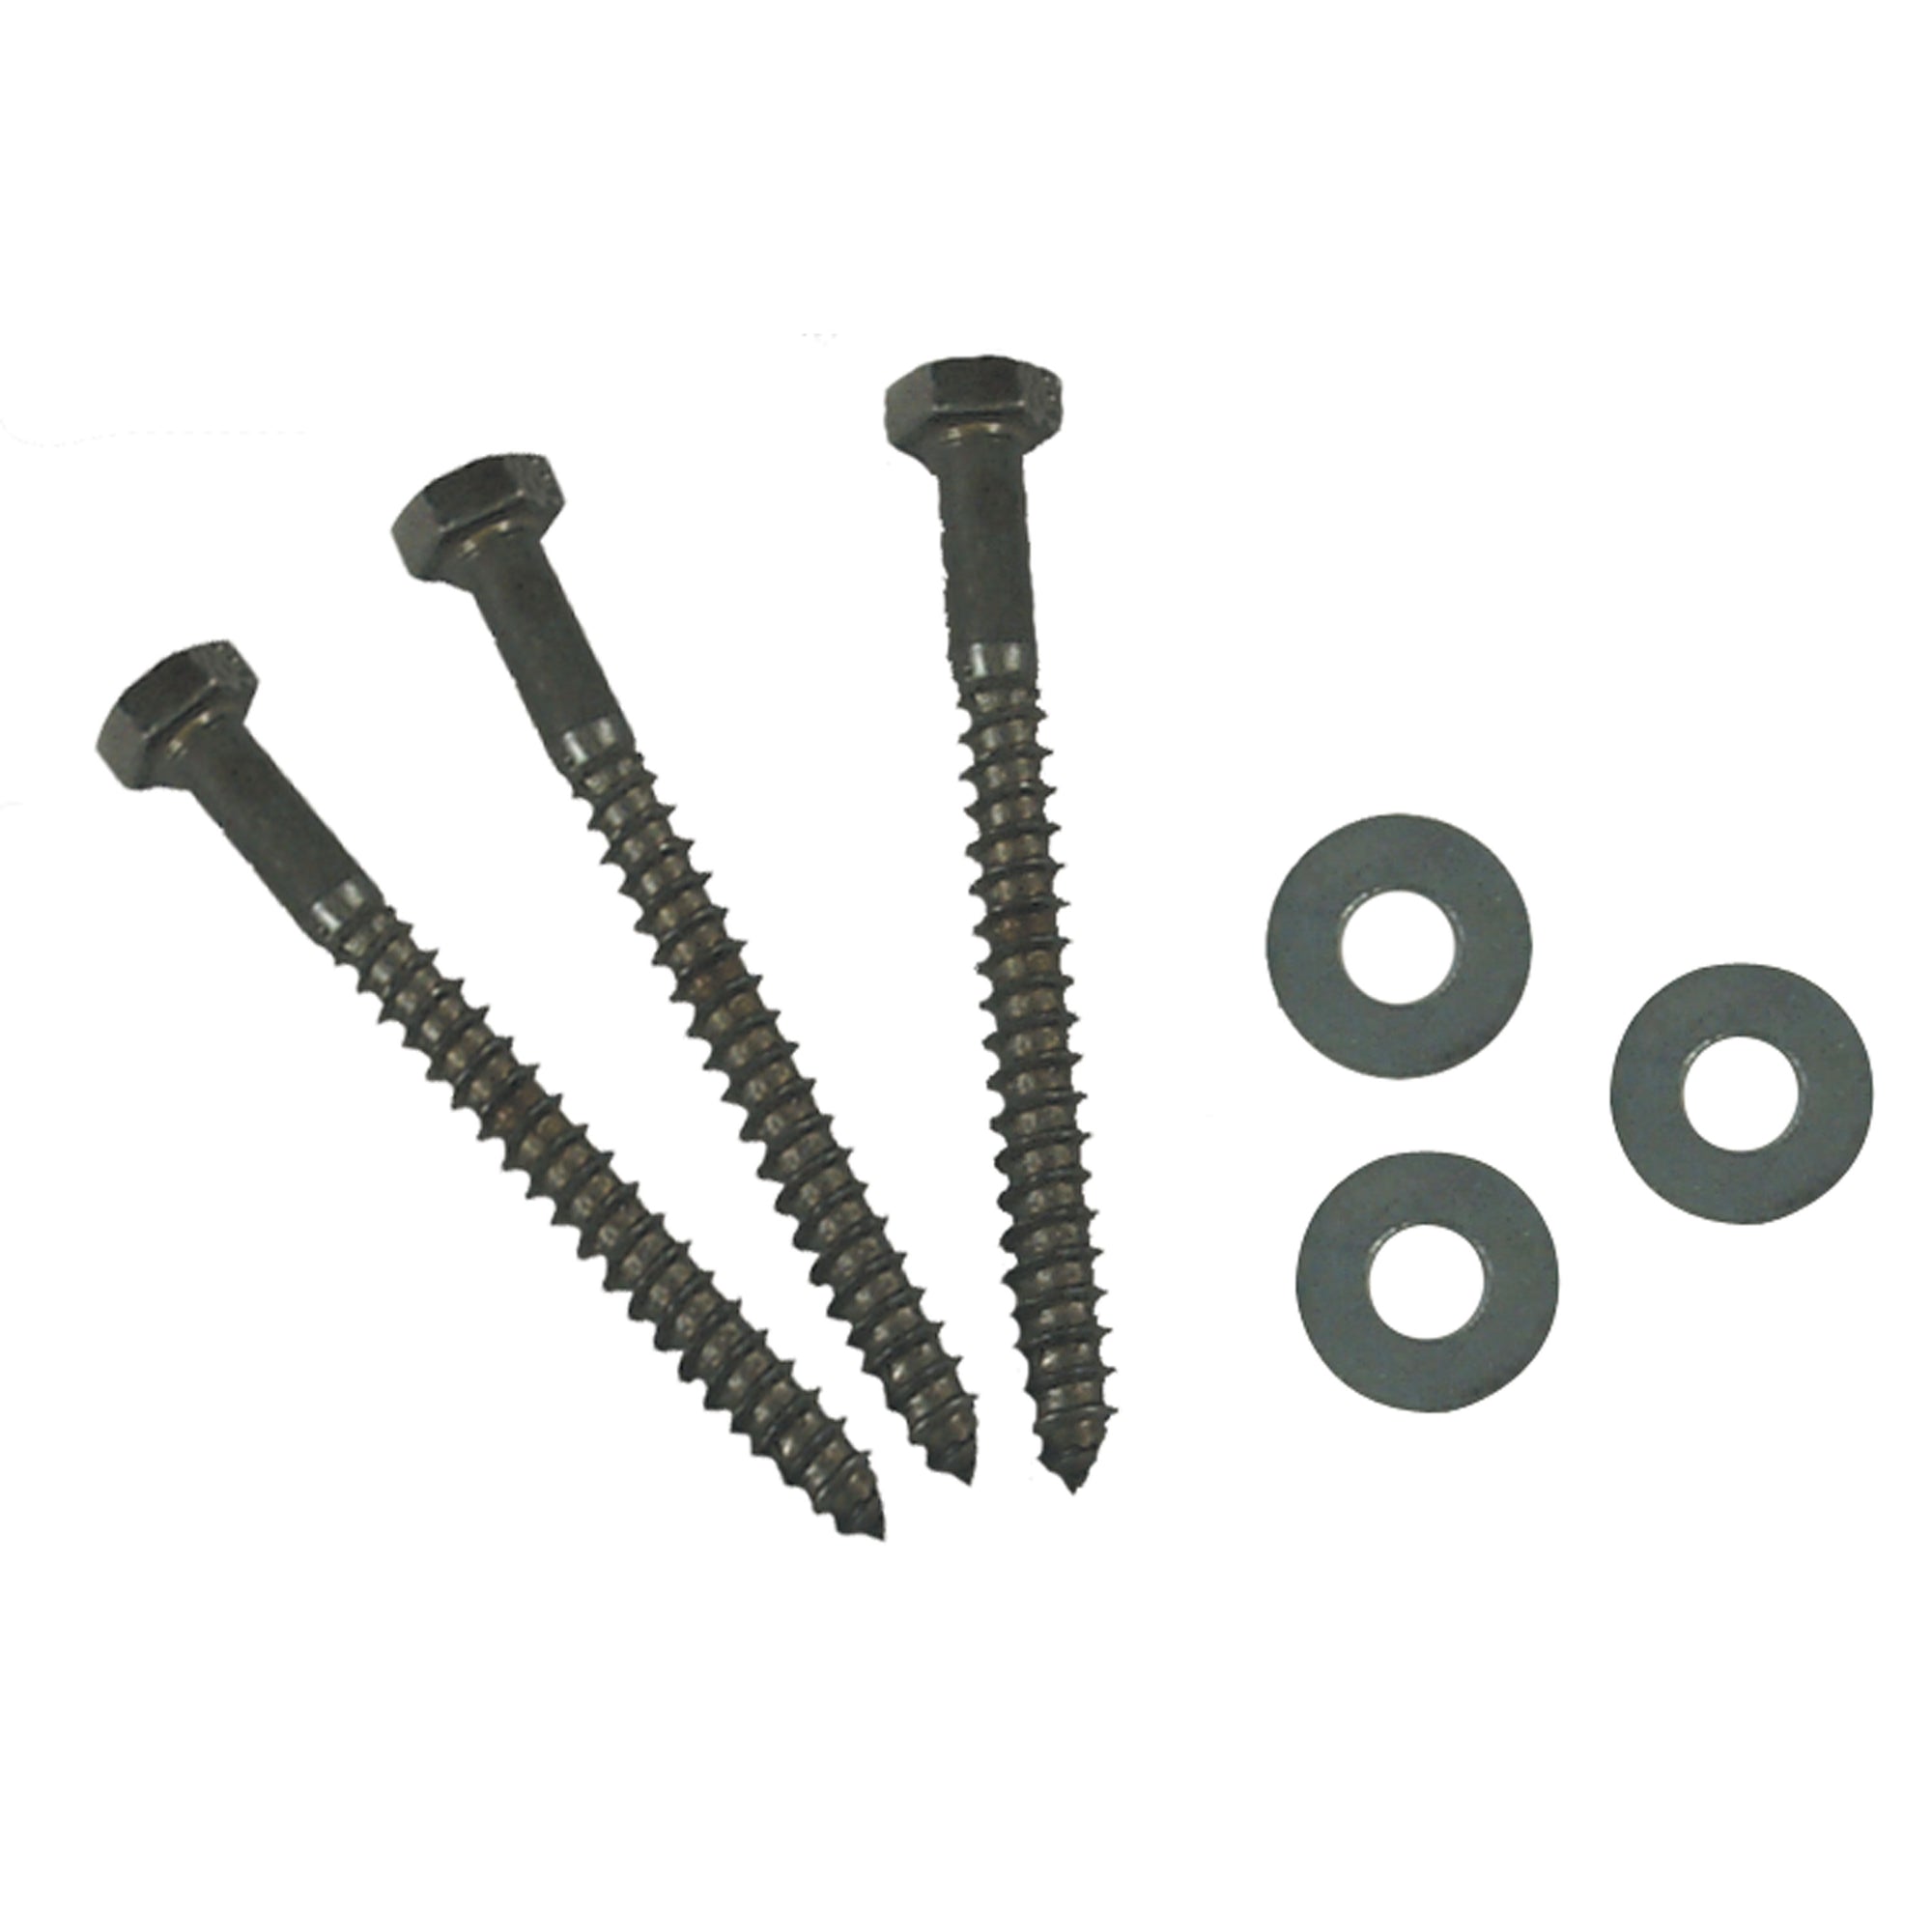 AP Products 012-LW 25 3/8 X 6 Hex Lag Screw with Washer, Pack of 25 - 3/8" x 6"